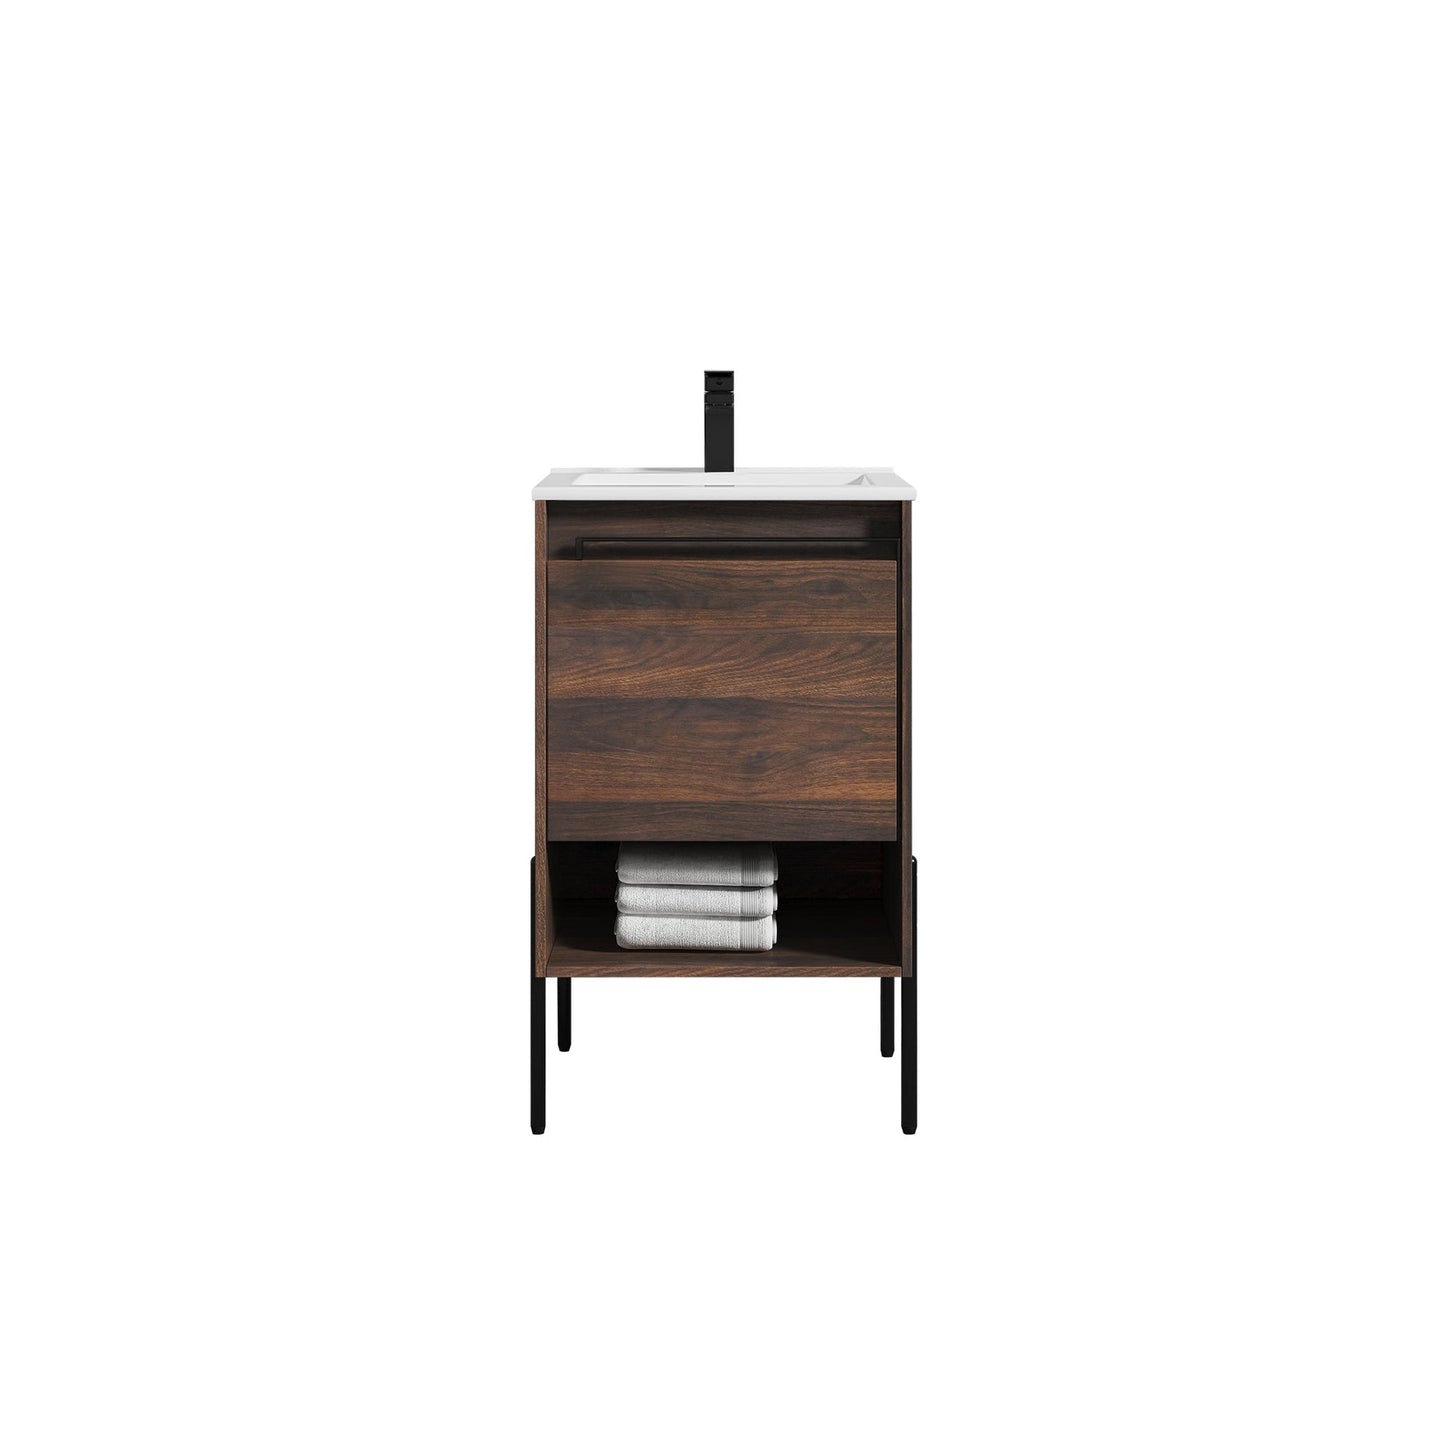 Blossom Turin 20" 1-Drawer Cali Walnut Freestanding Single Vanity Base With Open Shelf, Handle and Legs